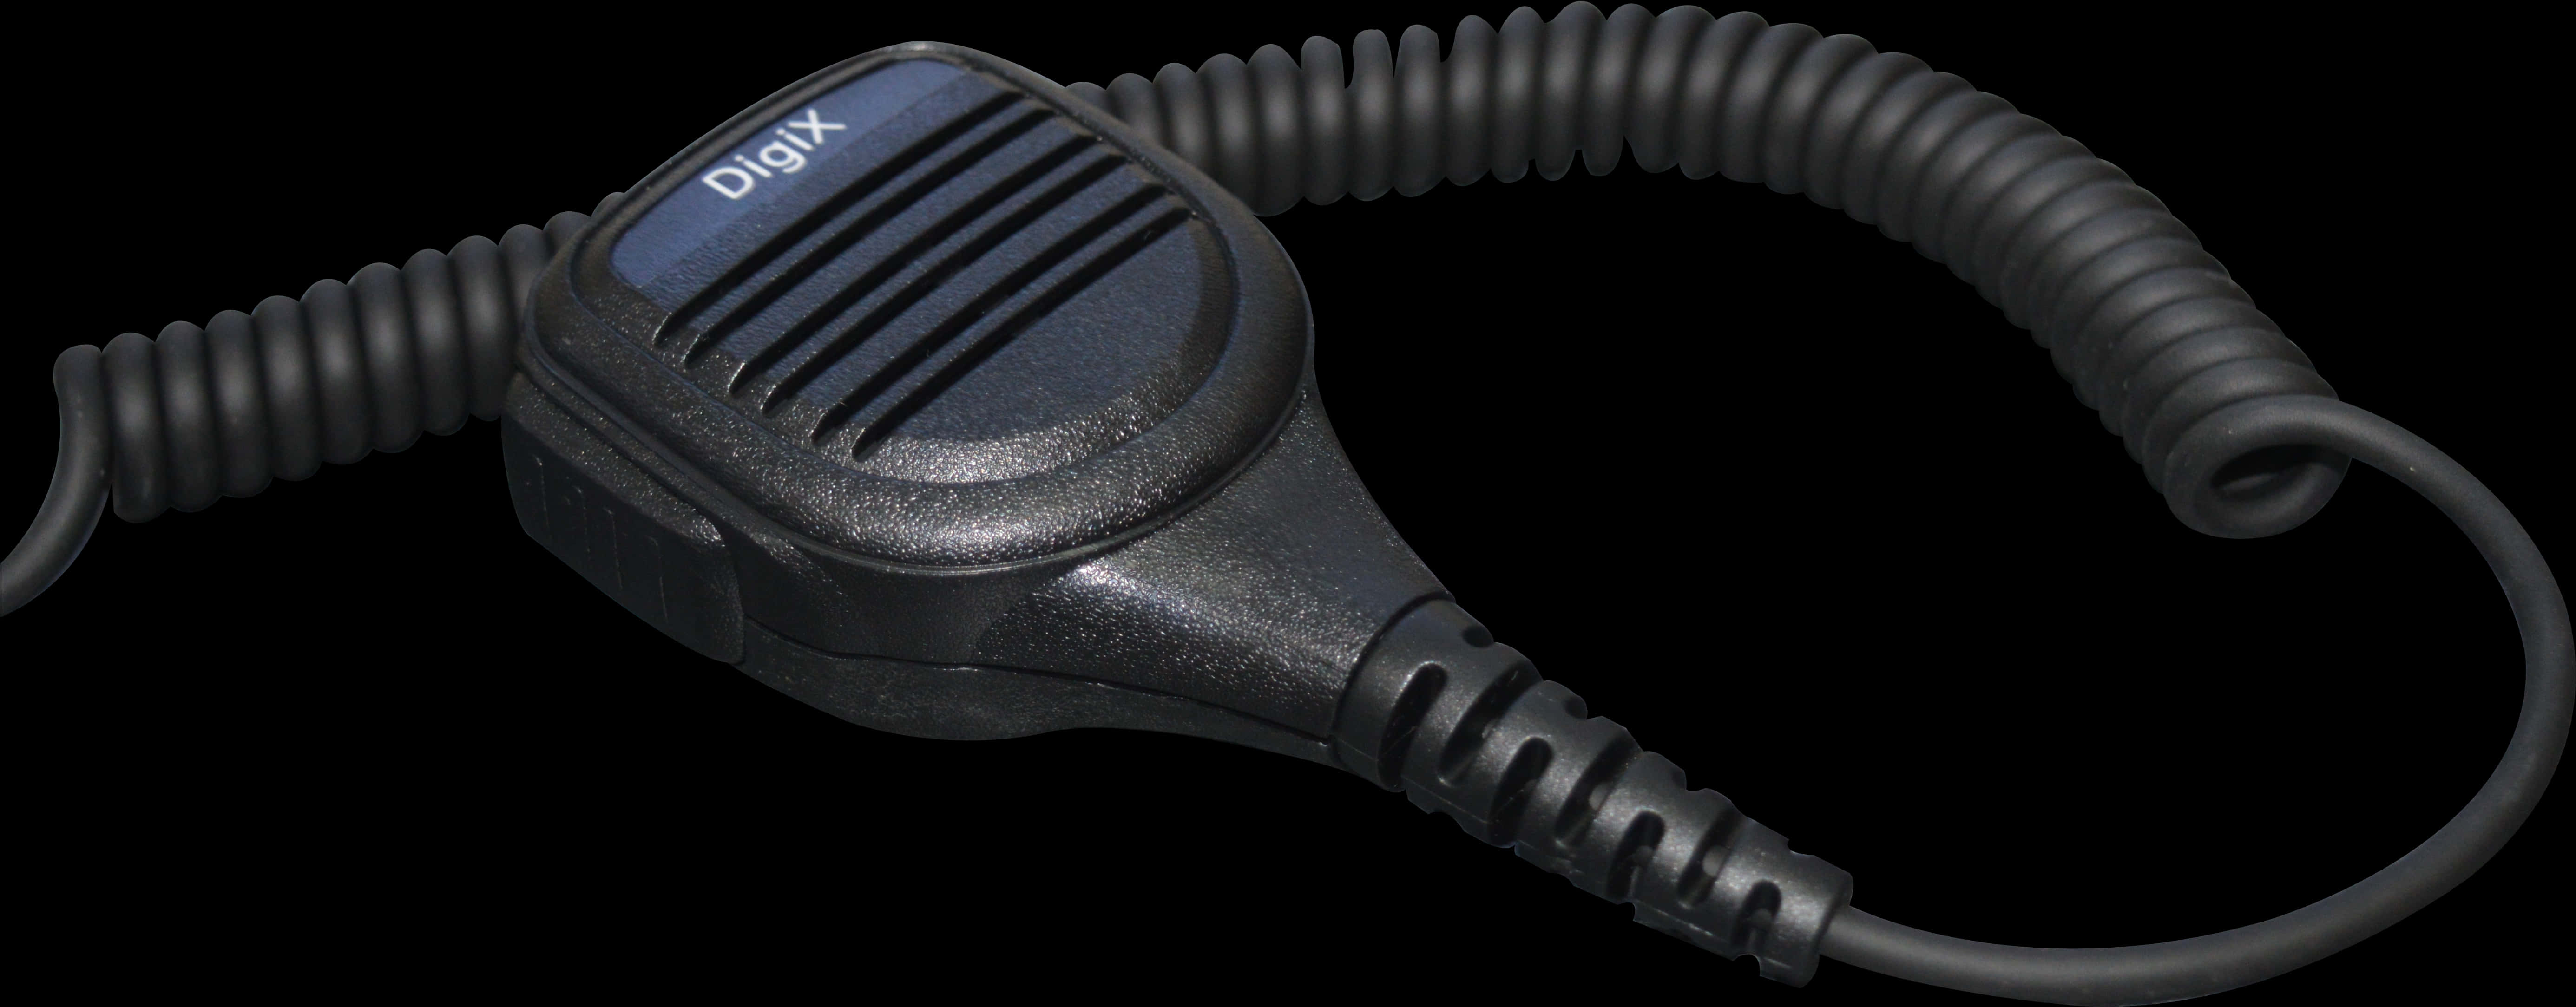 A Black Microphone With A Coiled Cord